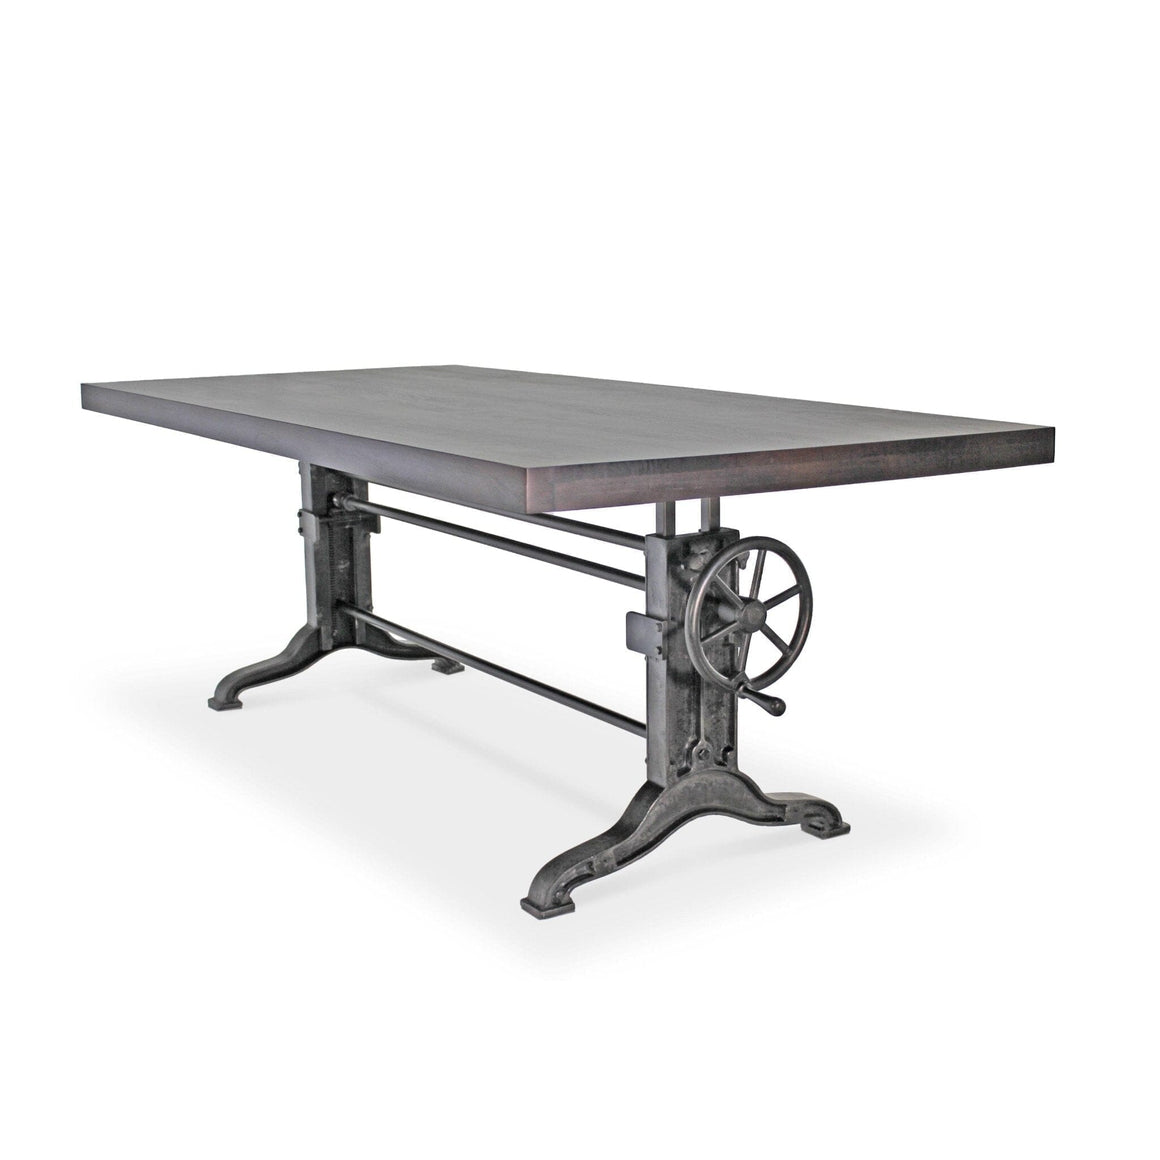 Frederick Adjustable Height Dining Table Desk - Cast Iron - Ebony - Rustic Deco Incorporated